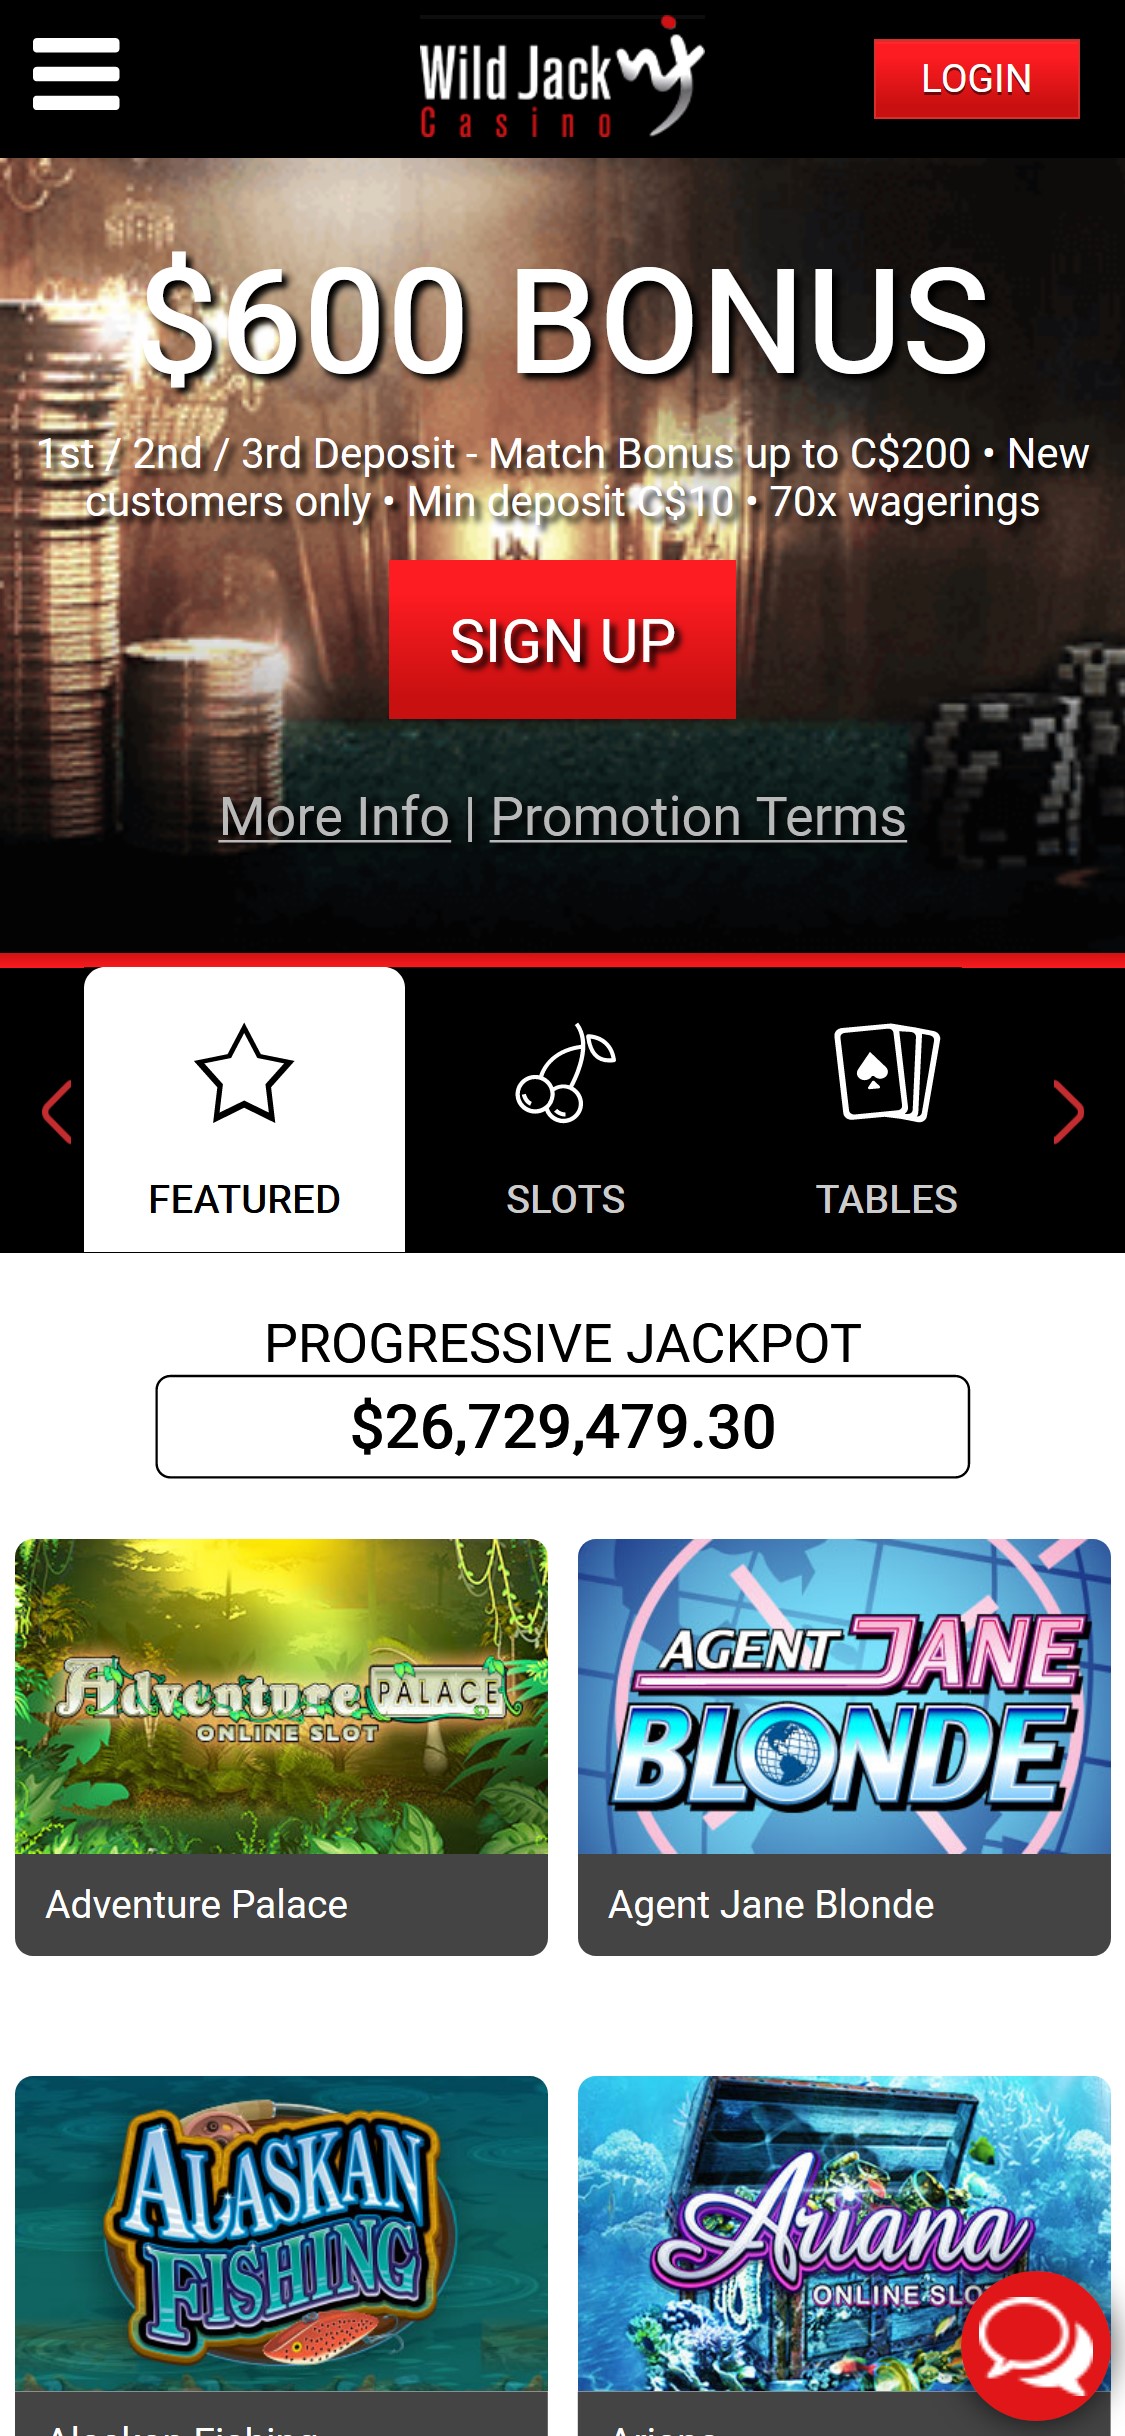 Wild Jack Casino Mobile Review